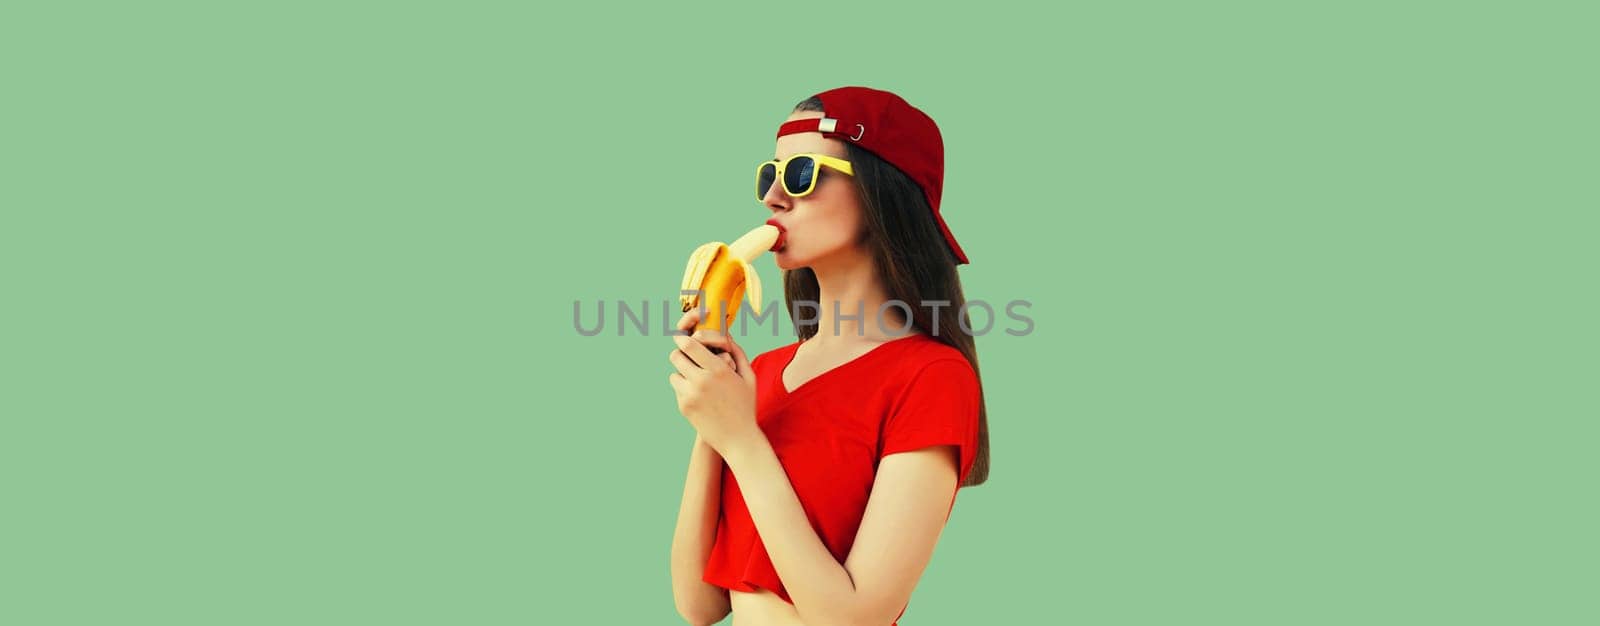 Stylish young woman eating banana in red baseball cap on green studio background by Rohappy